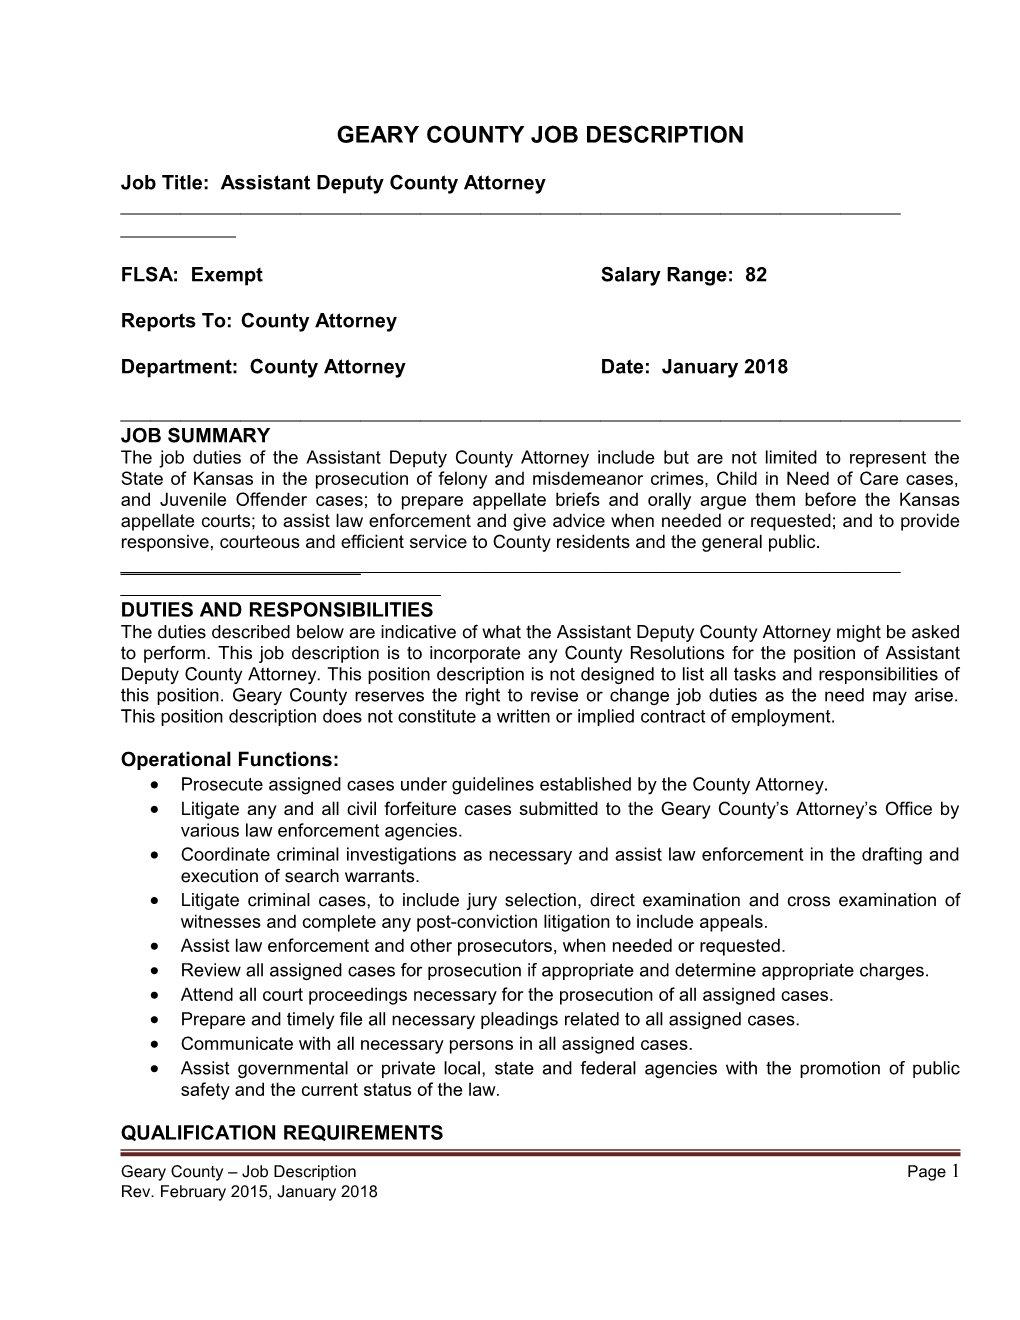 Job Title: Assistant Deputy County Attorney